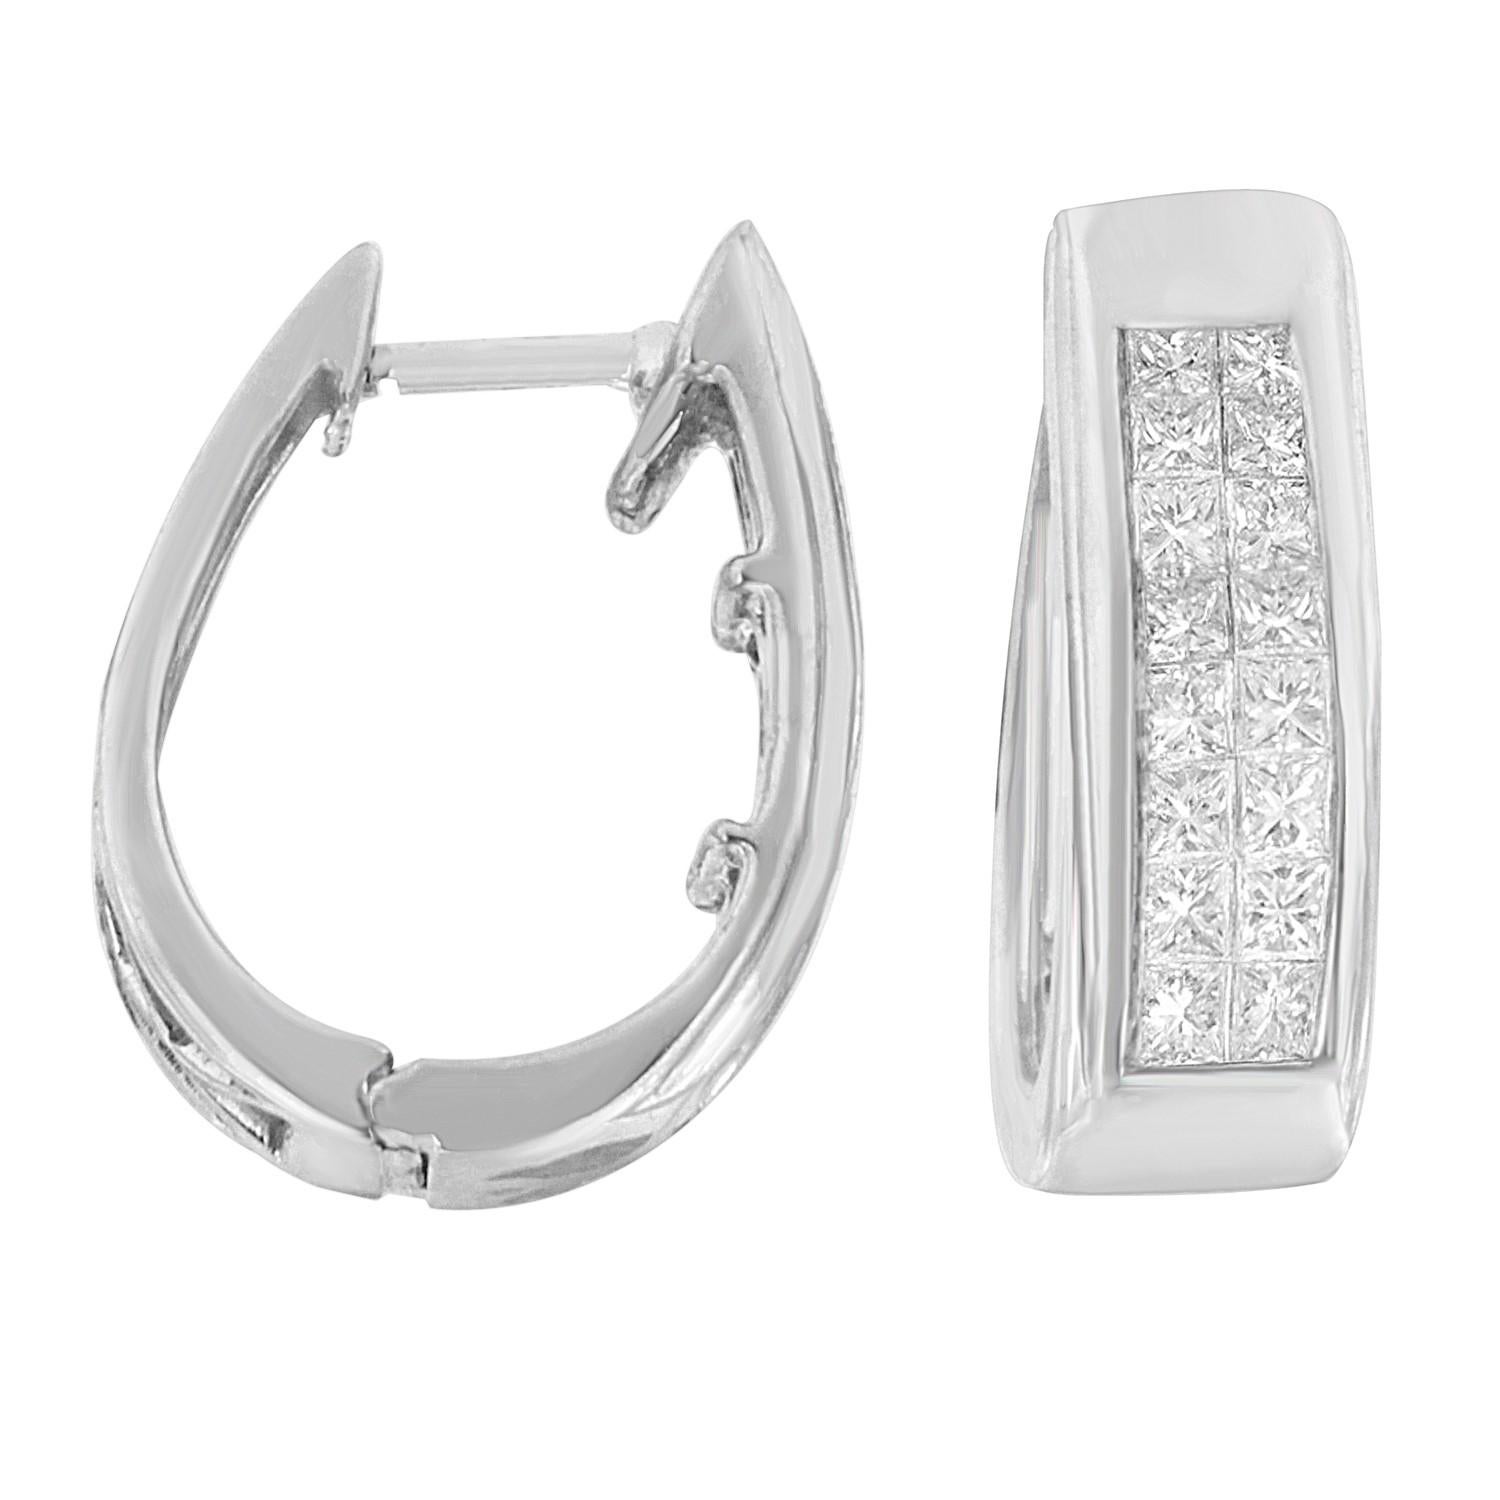 Calling all classy girls, this sparkling set of earrings with dazzling princess-cut diamonds is irresistible. Set in lustrous 14k white gold, these earrings feature a high polish finish to give it a sparkling look. And easy to use clasp and